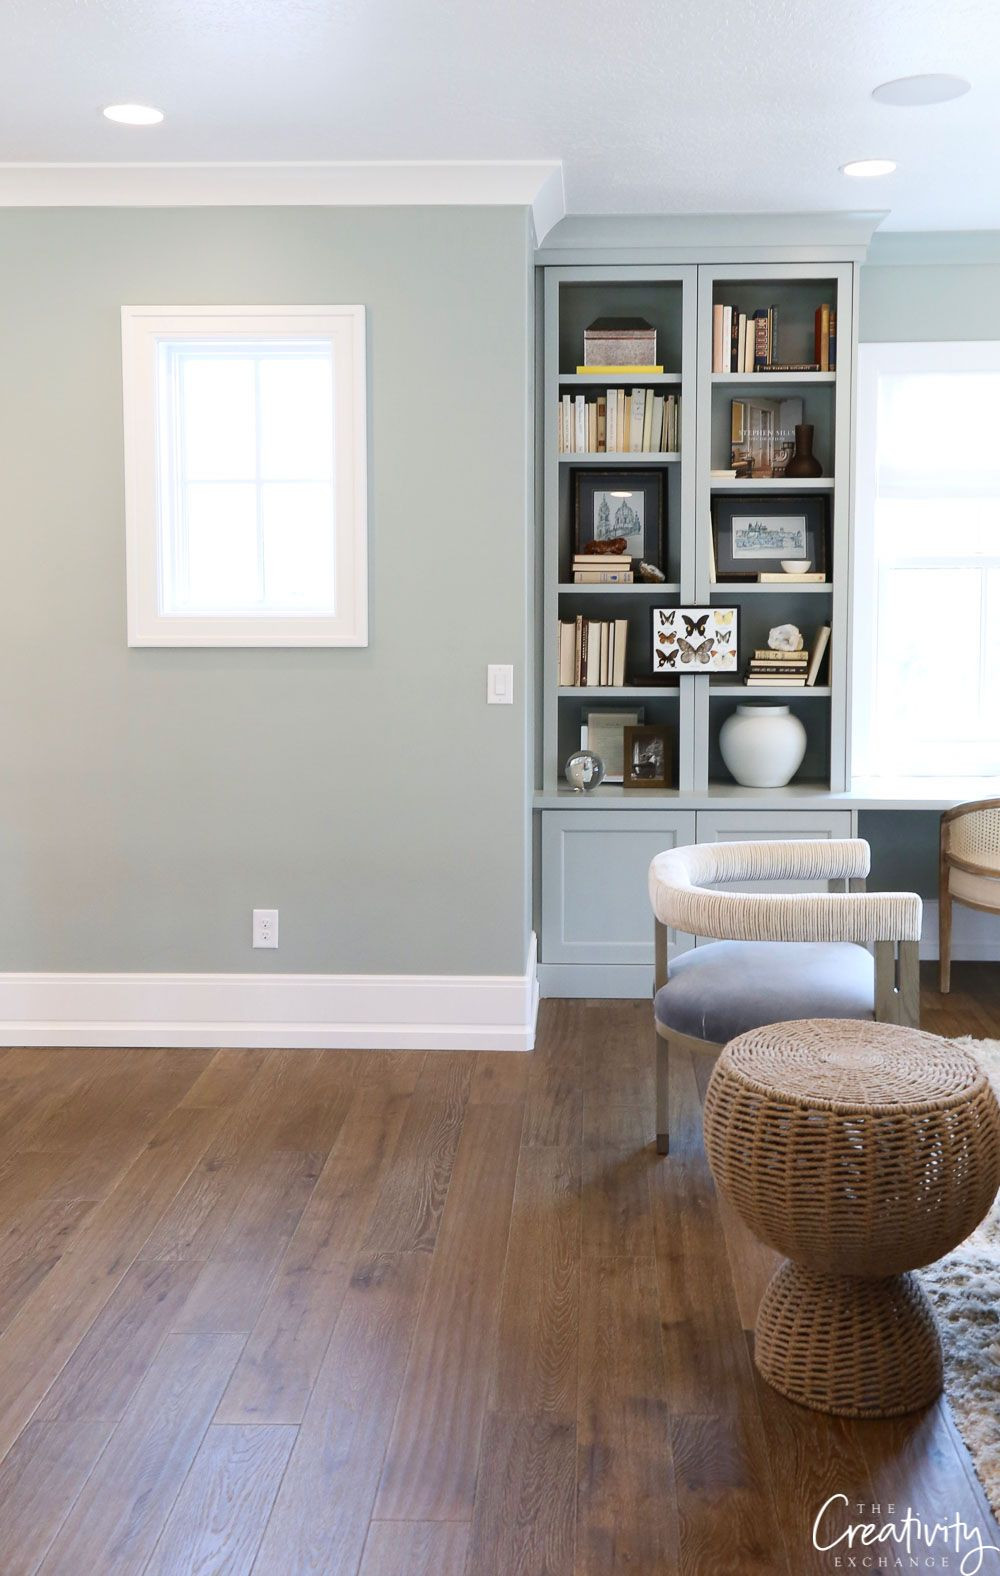 11 Fashionable Hardwood Floor Color Trends 2017 2024 free download hardwood floor color trends 2017 of 2019 paint color trends and forecasts pick a paint color in wall and cabinetry color is sherwin williams oyster bay